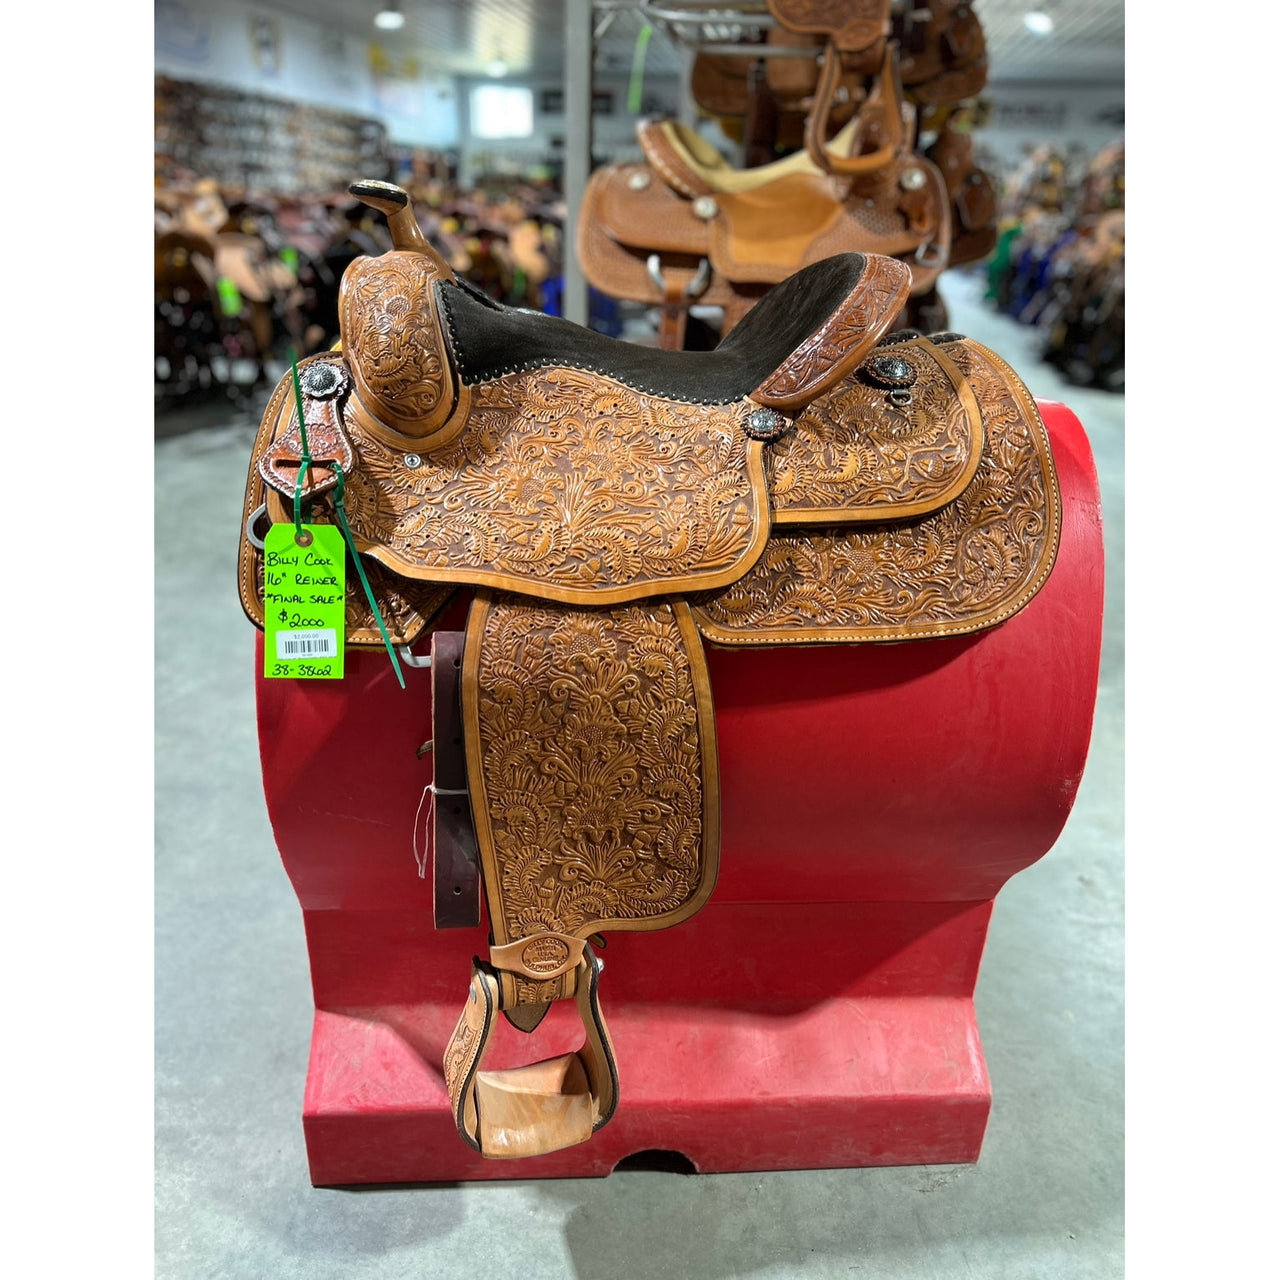 Billy Cook 16"  Reining Saddle - FINAL SALE